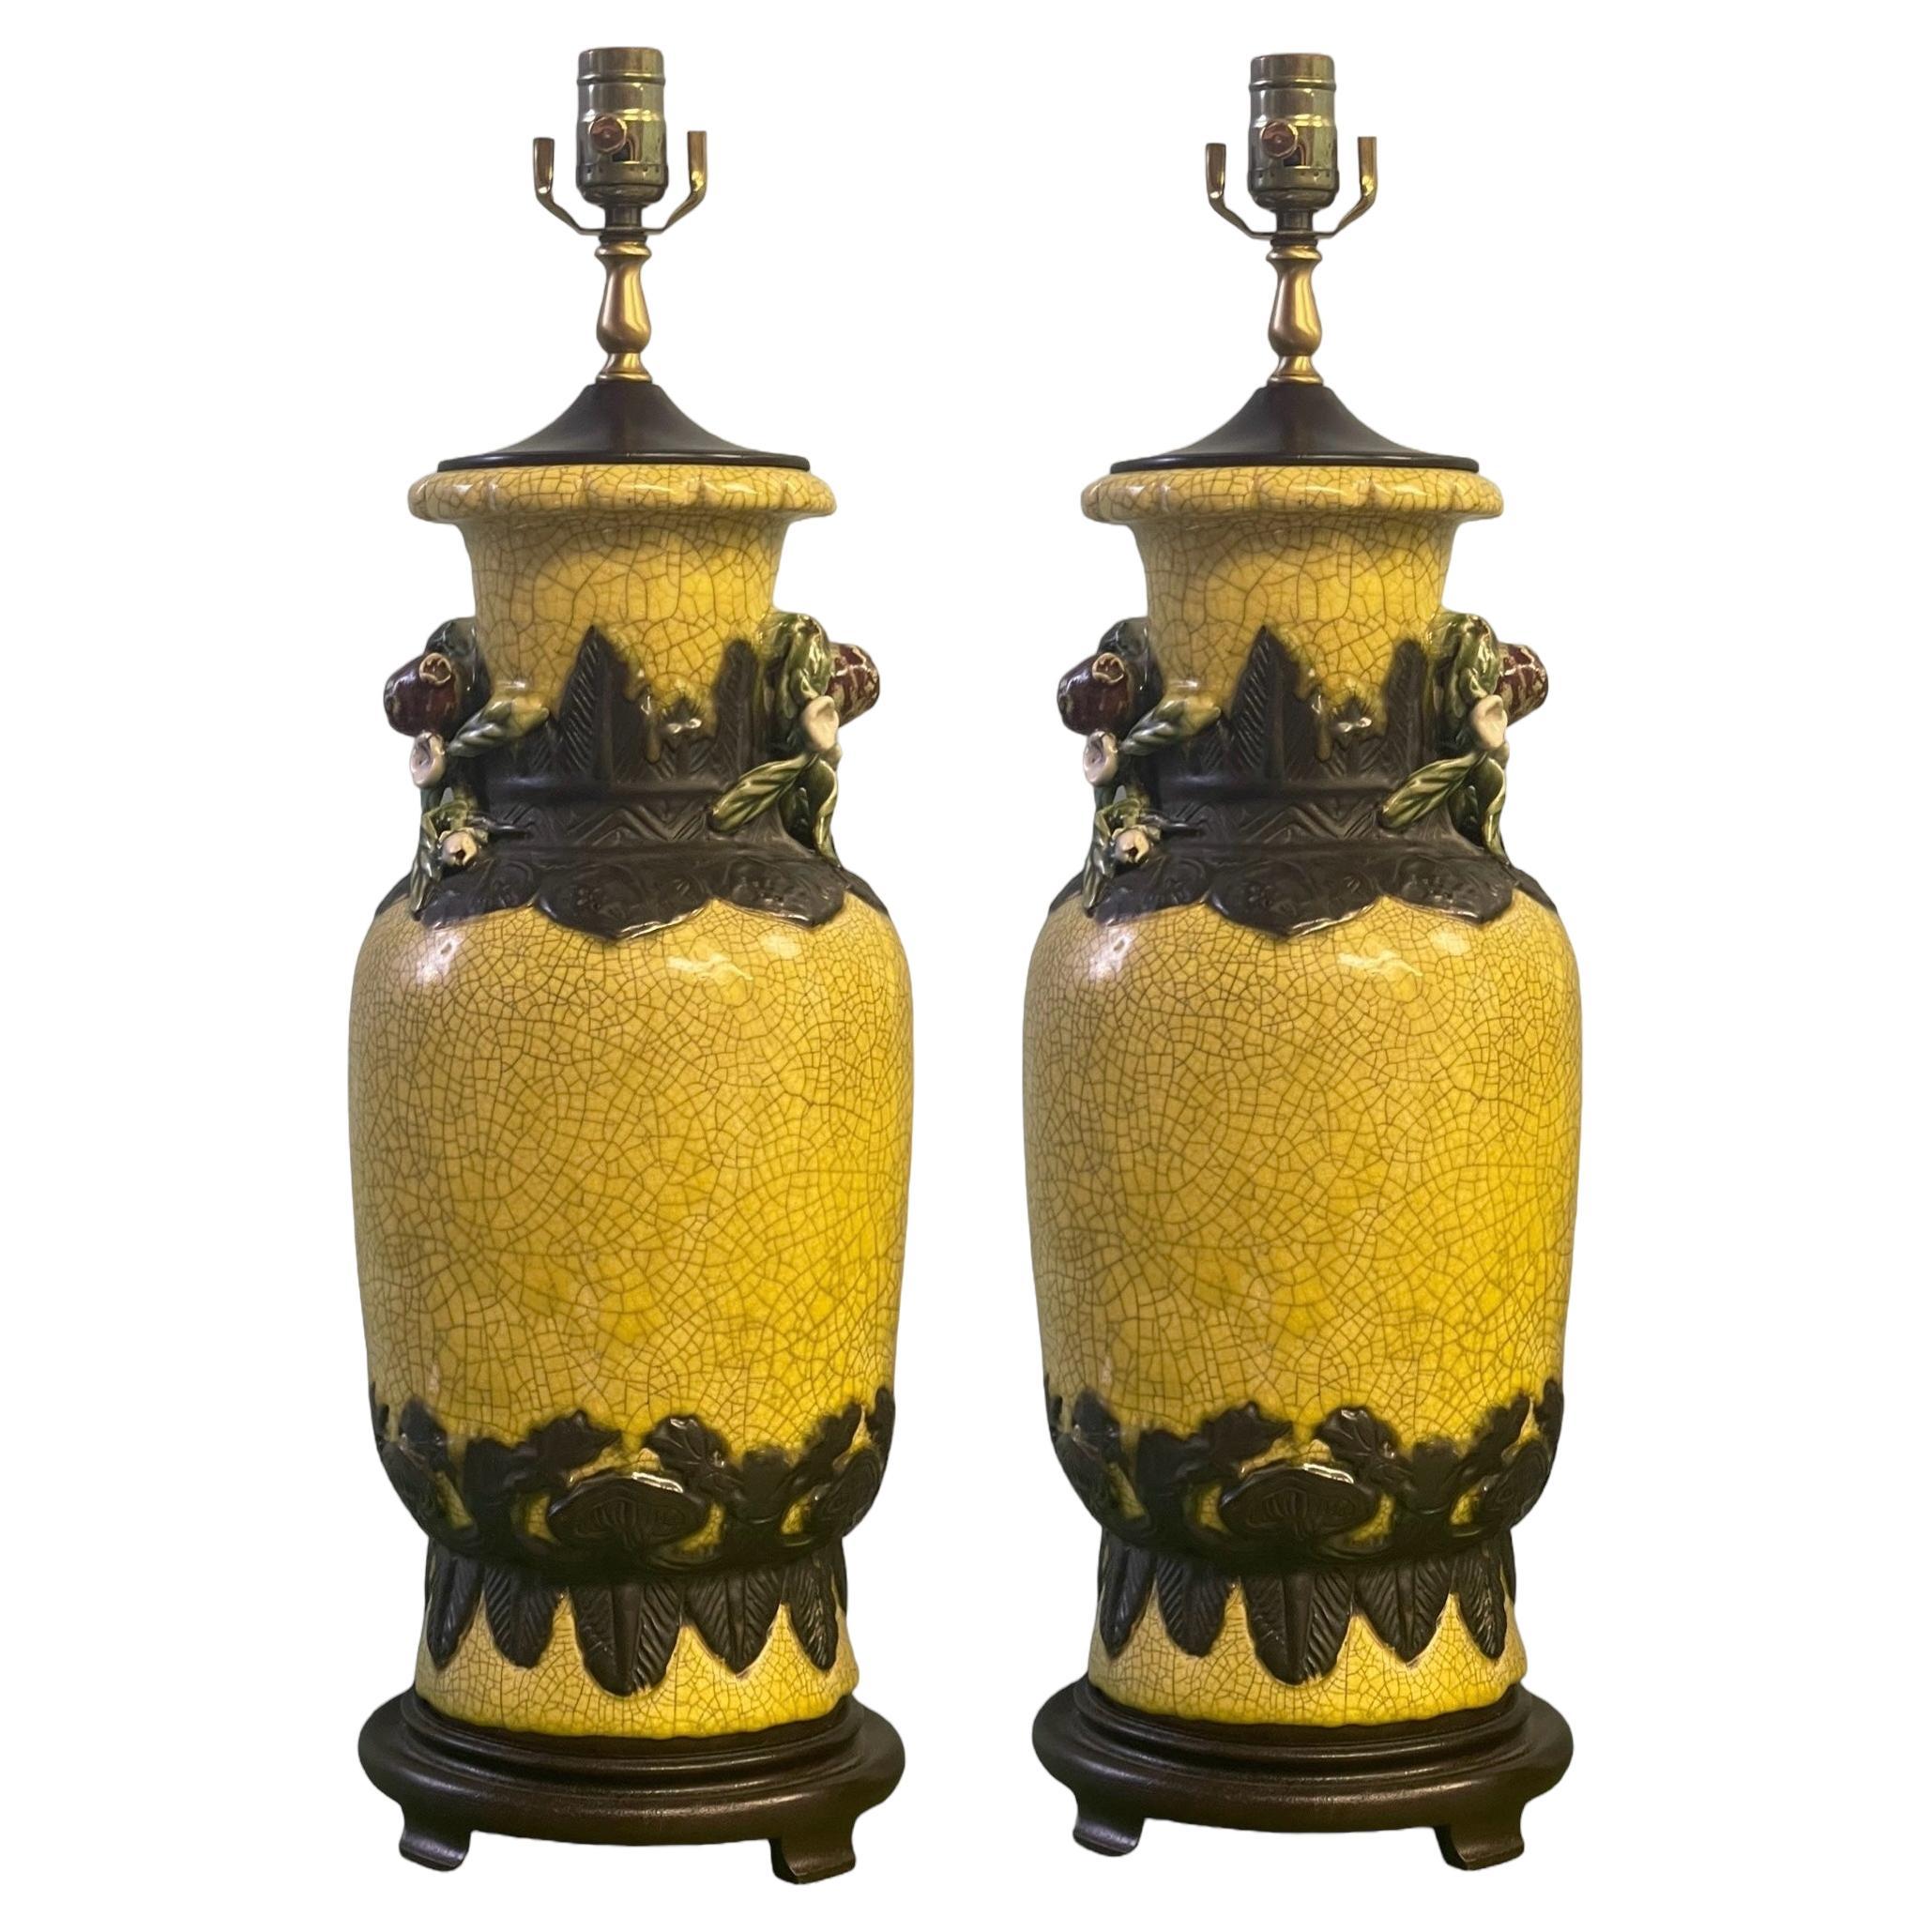 Chinese Export Style Jar / Vase Form Crackle Glaze Table Lamps W/ Fruit - Pair For Sale